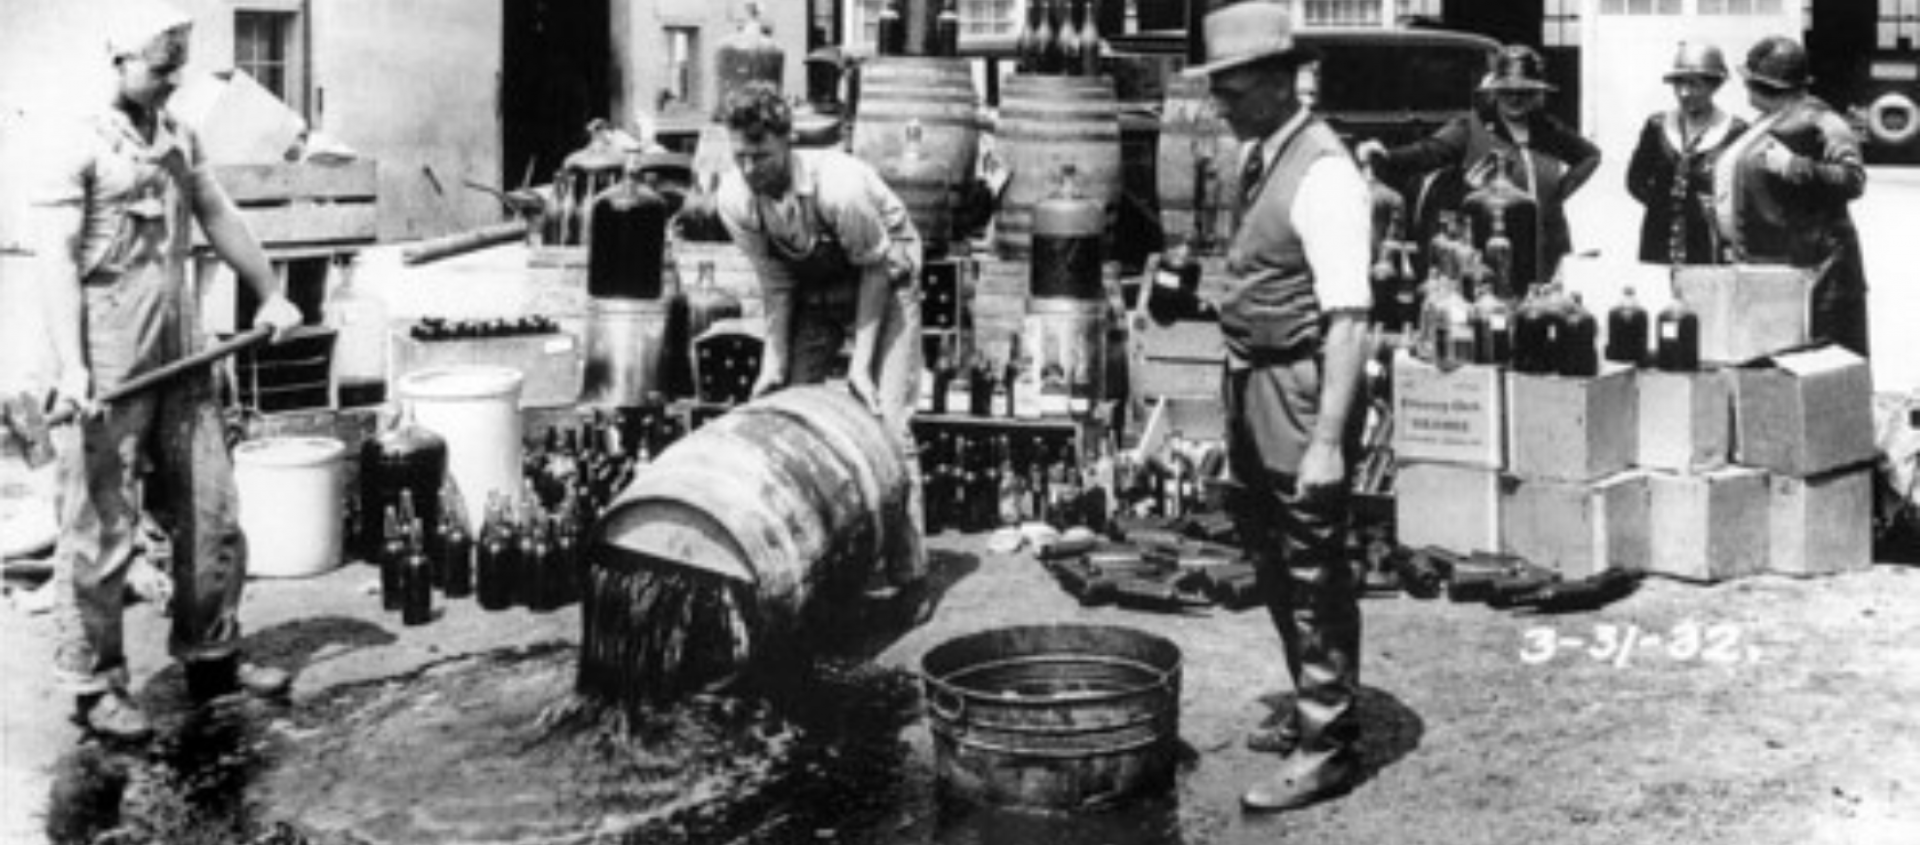 Photo for: Prohibition in the USA: A Sobering Look at Chicago's Role in the Dry Era